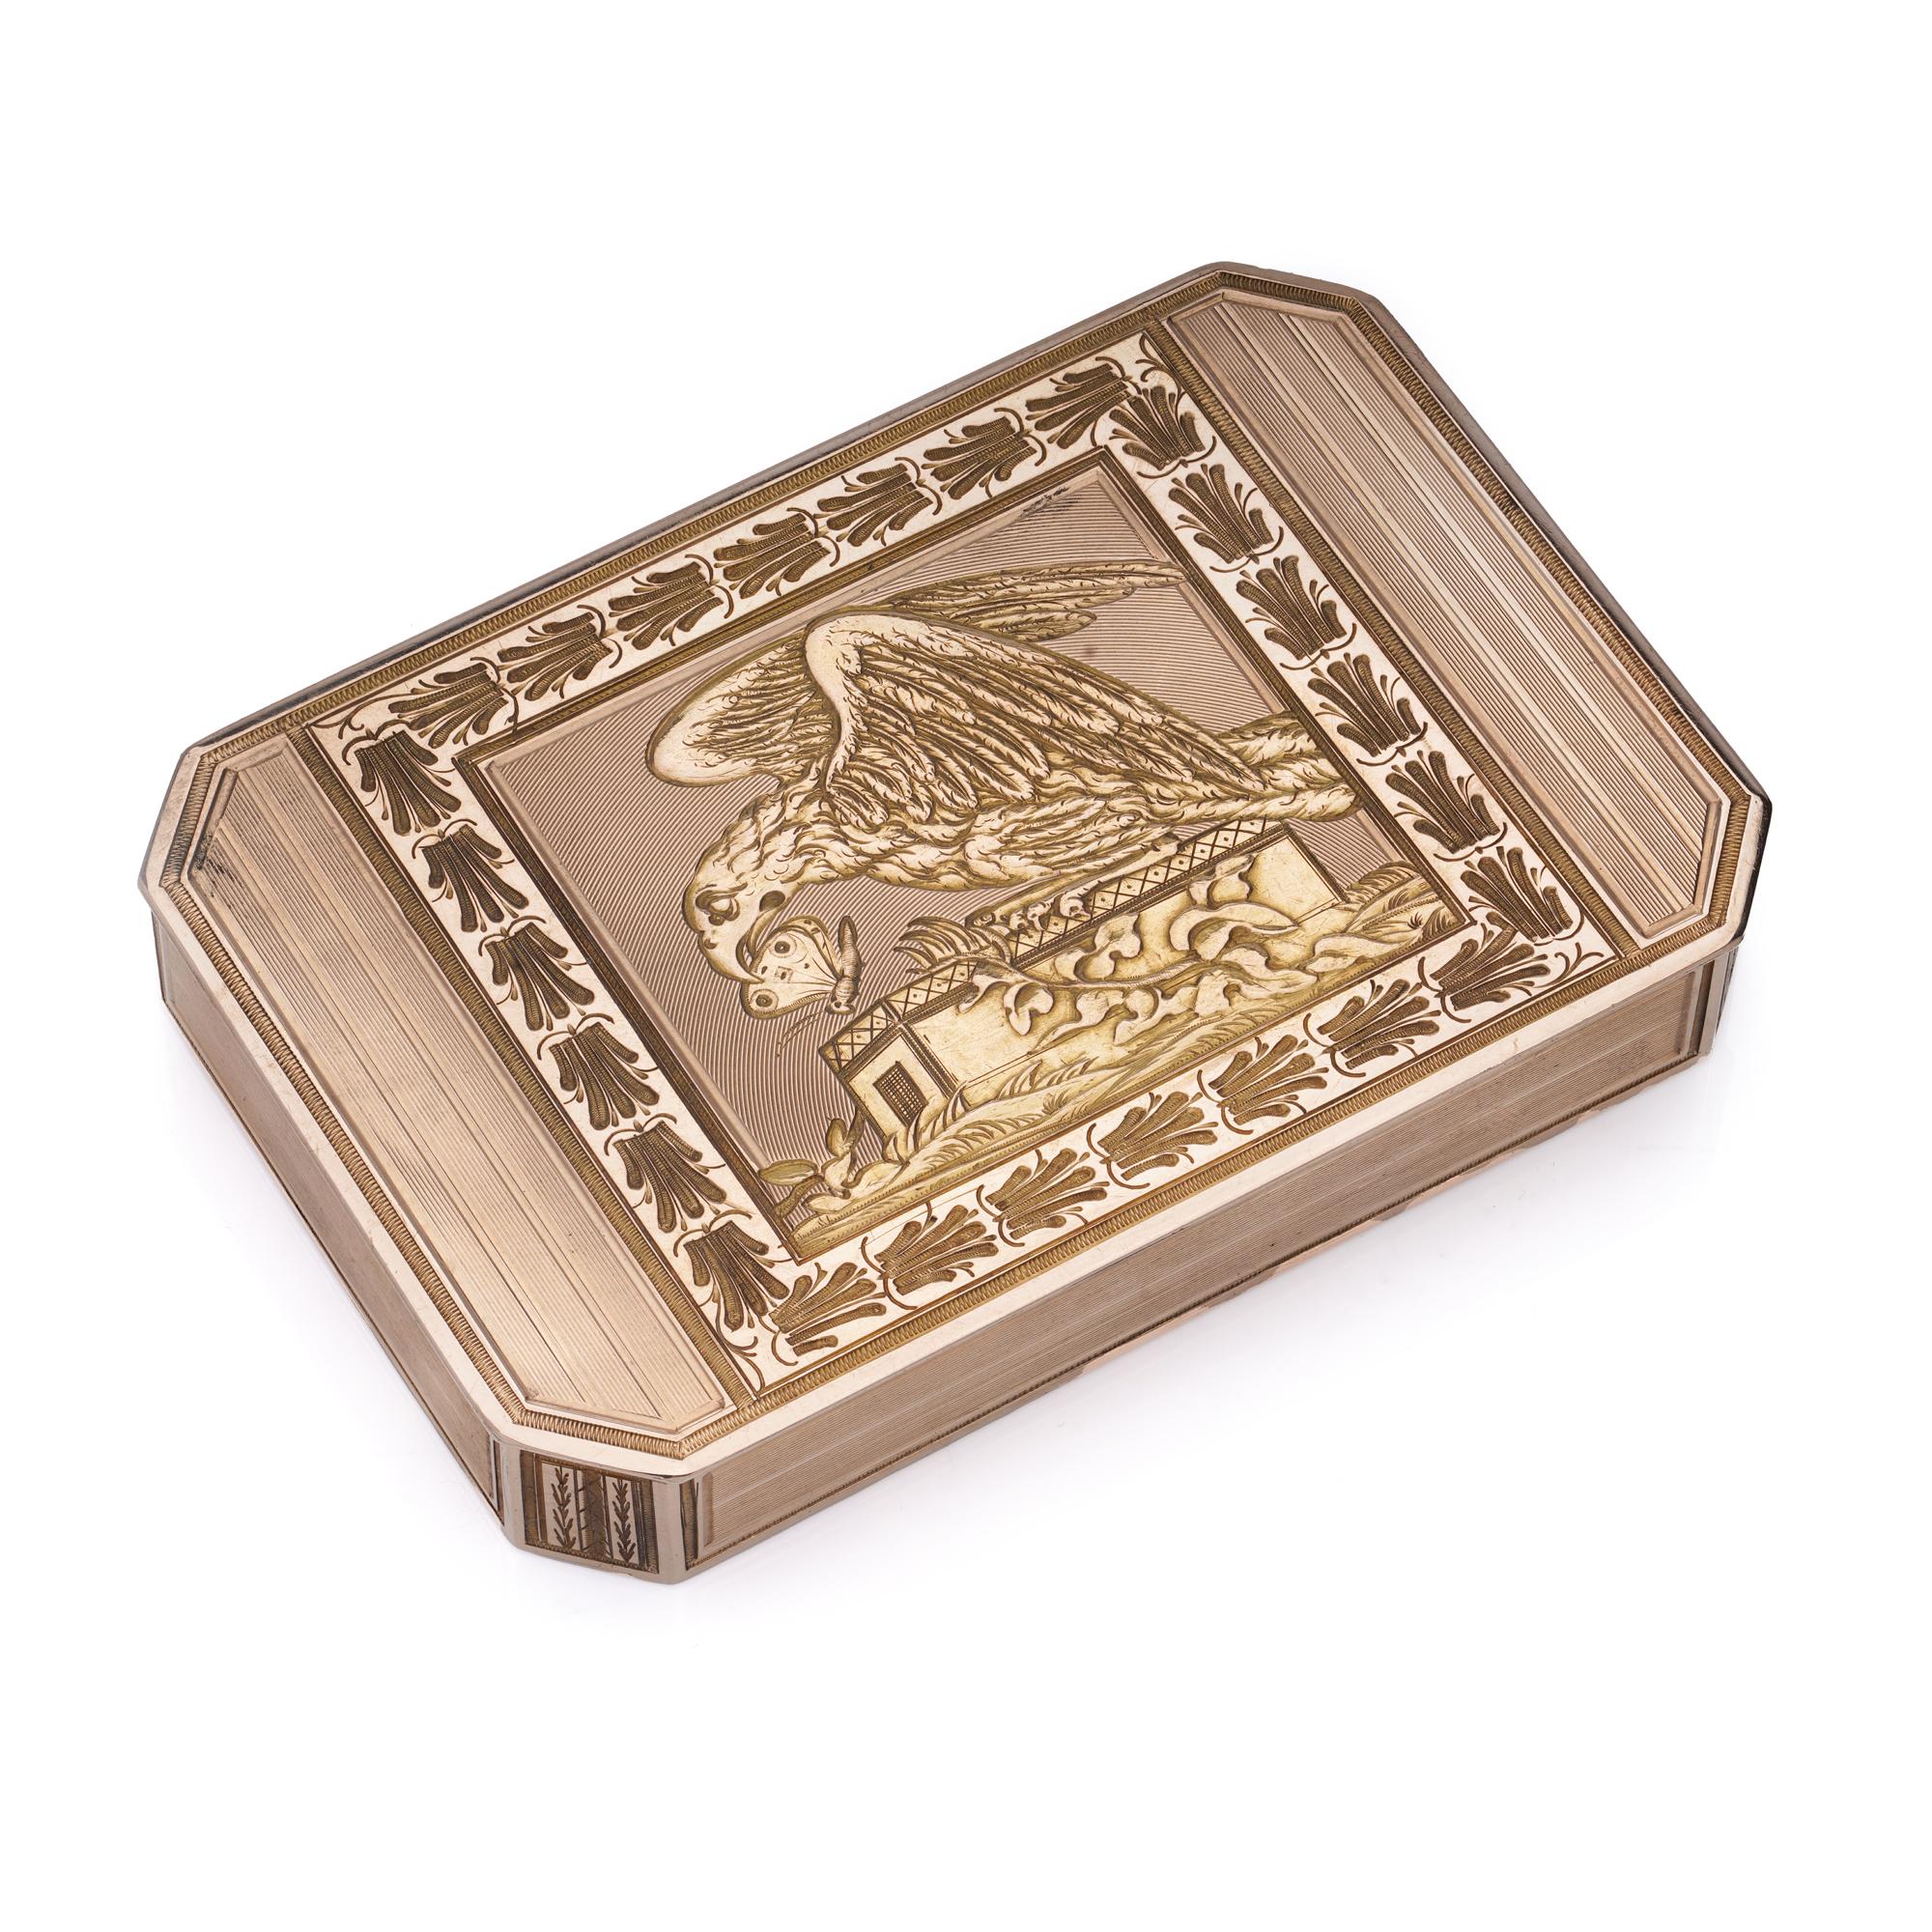 Antique 19th-century pink gold snuff box with eagle and butterfly. 

Dimensions:
Length x width x height: 9.2 x 6.3 x 1.5 cm 
Weight: 85 grams

Condition: general used, aged related wear and tear, good condition overall. 

